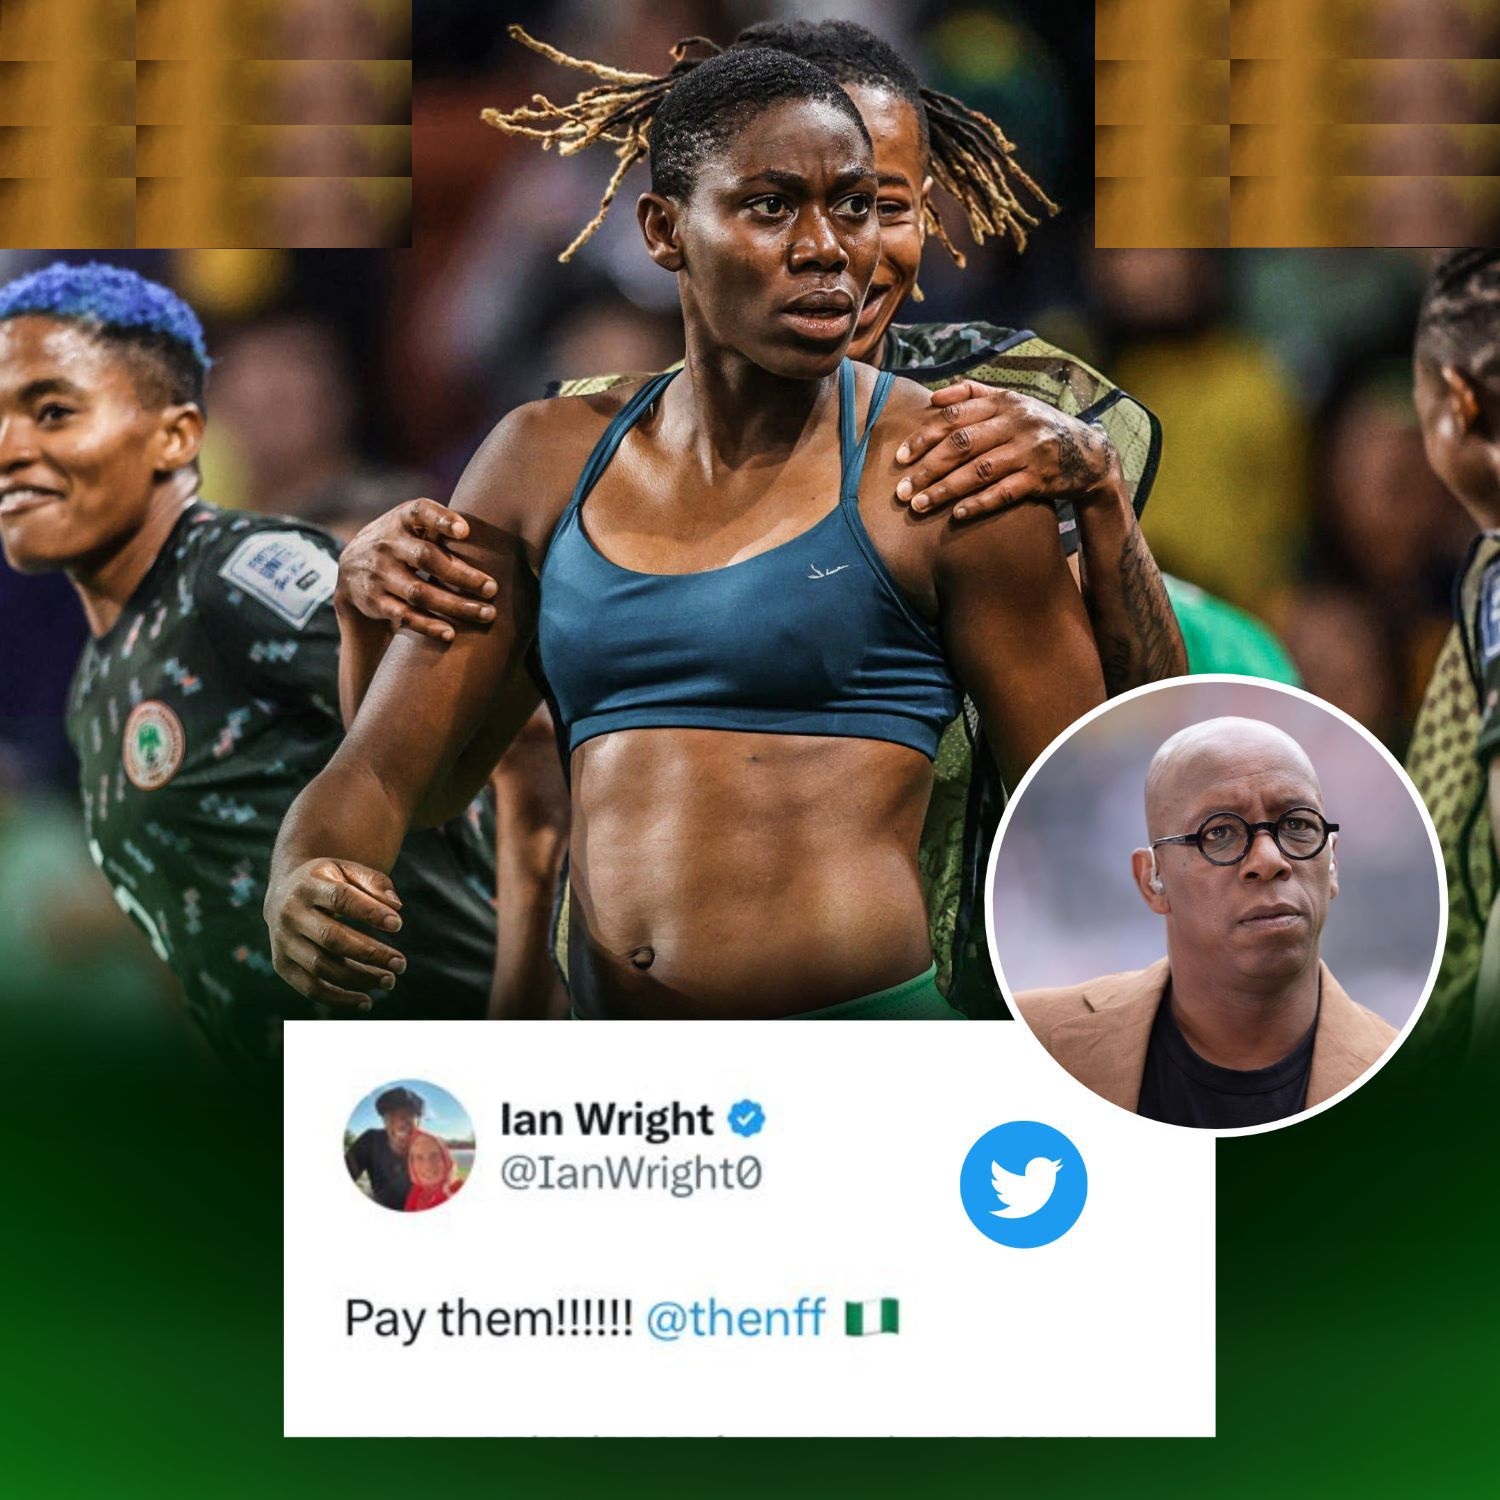 ARSENAL LEGEND, IAN WRIGHT CALLS OUT NFF TO PAY NIGERIA WOMEN’S TEAM MATCH BONUSES AMID ONGOING DISPUTE AFTER THEIR WORLD CUP VICTORY AGAINST AUSTRALIA